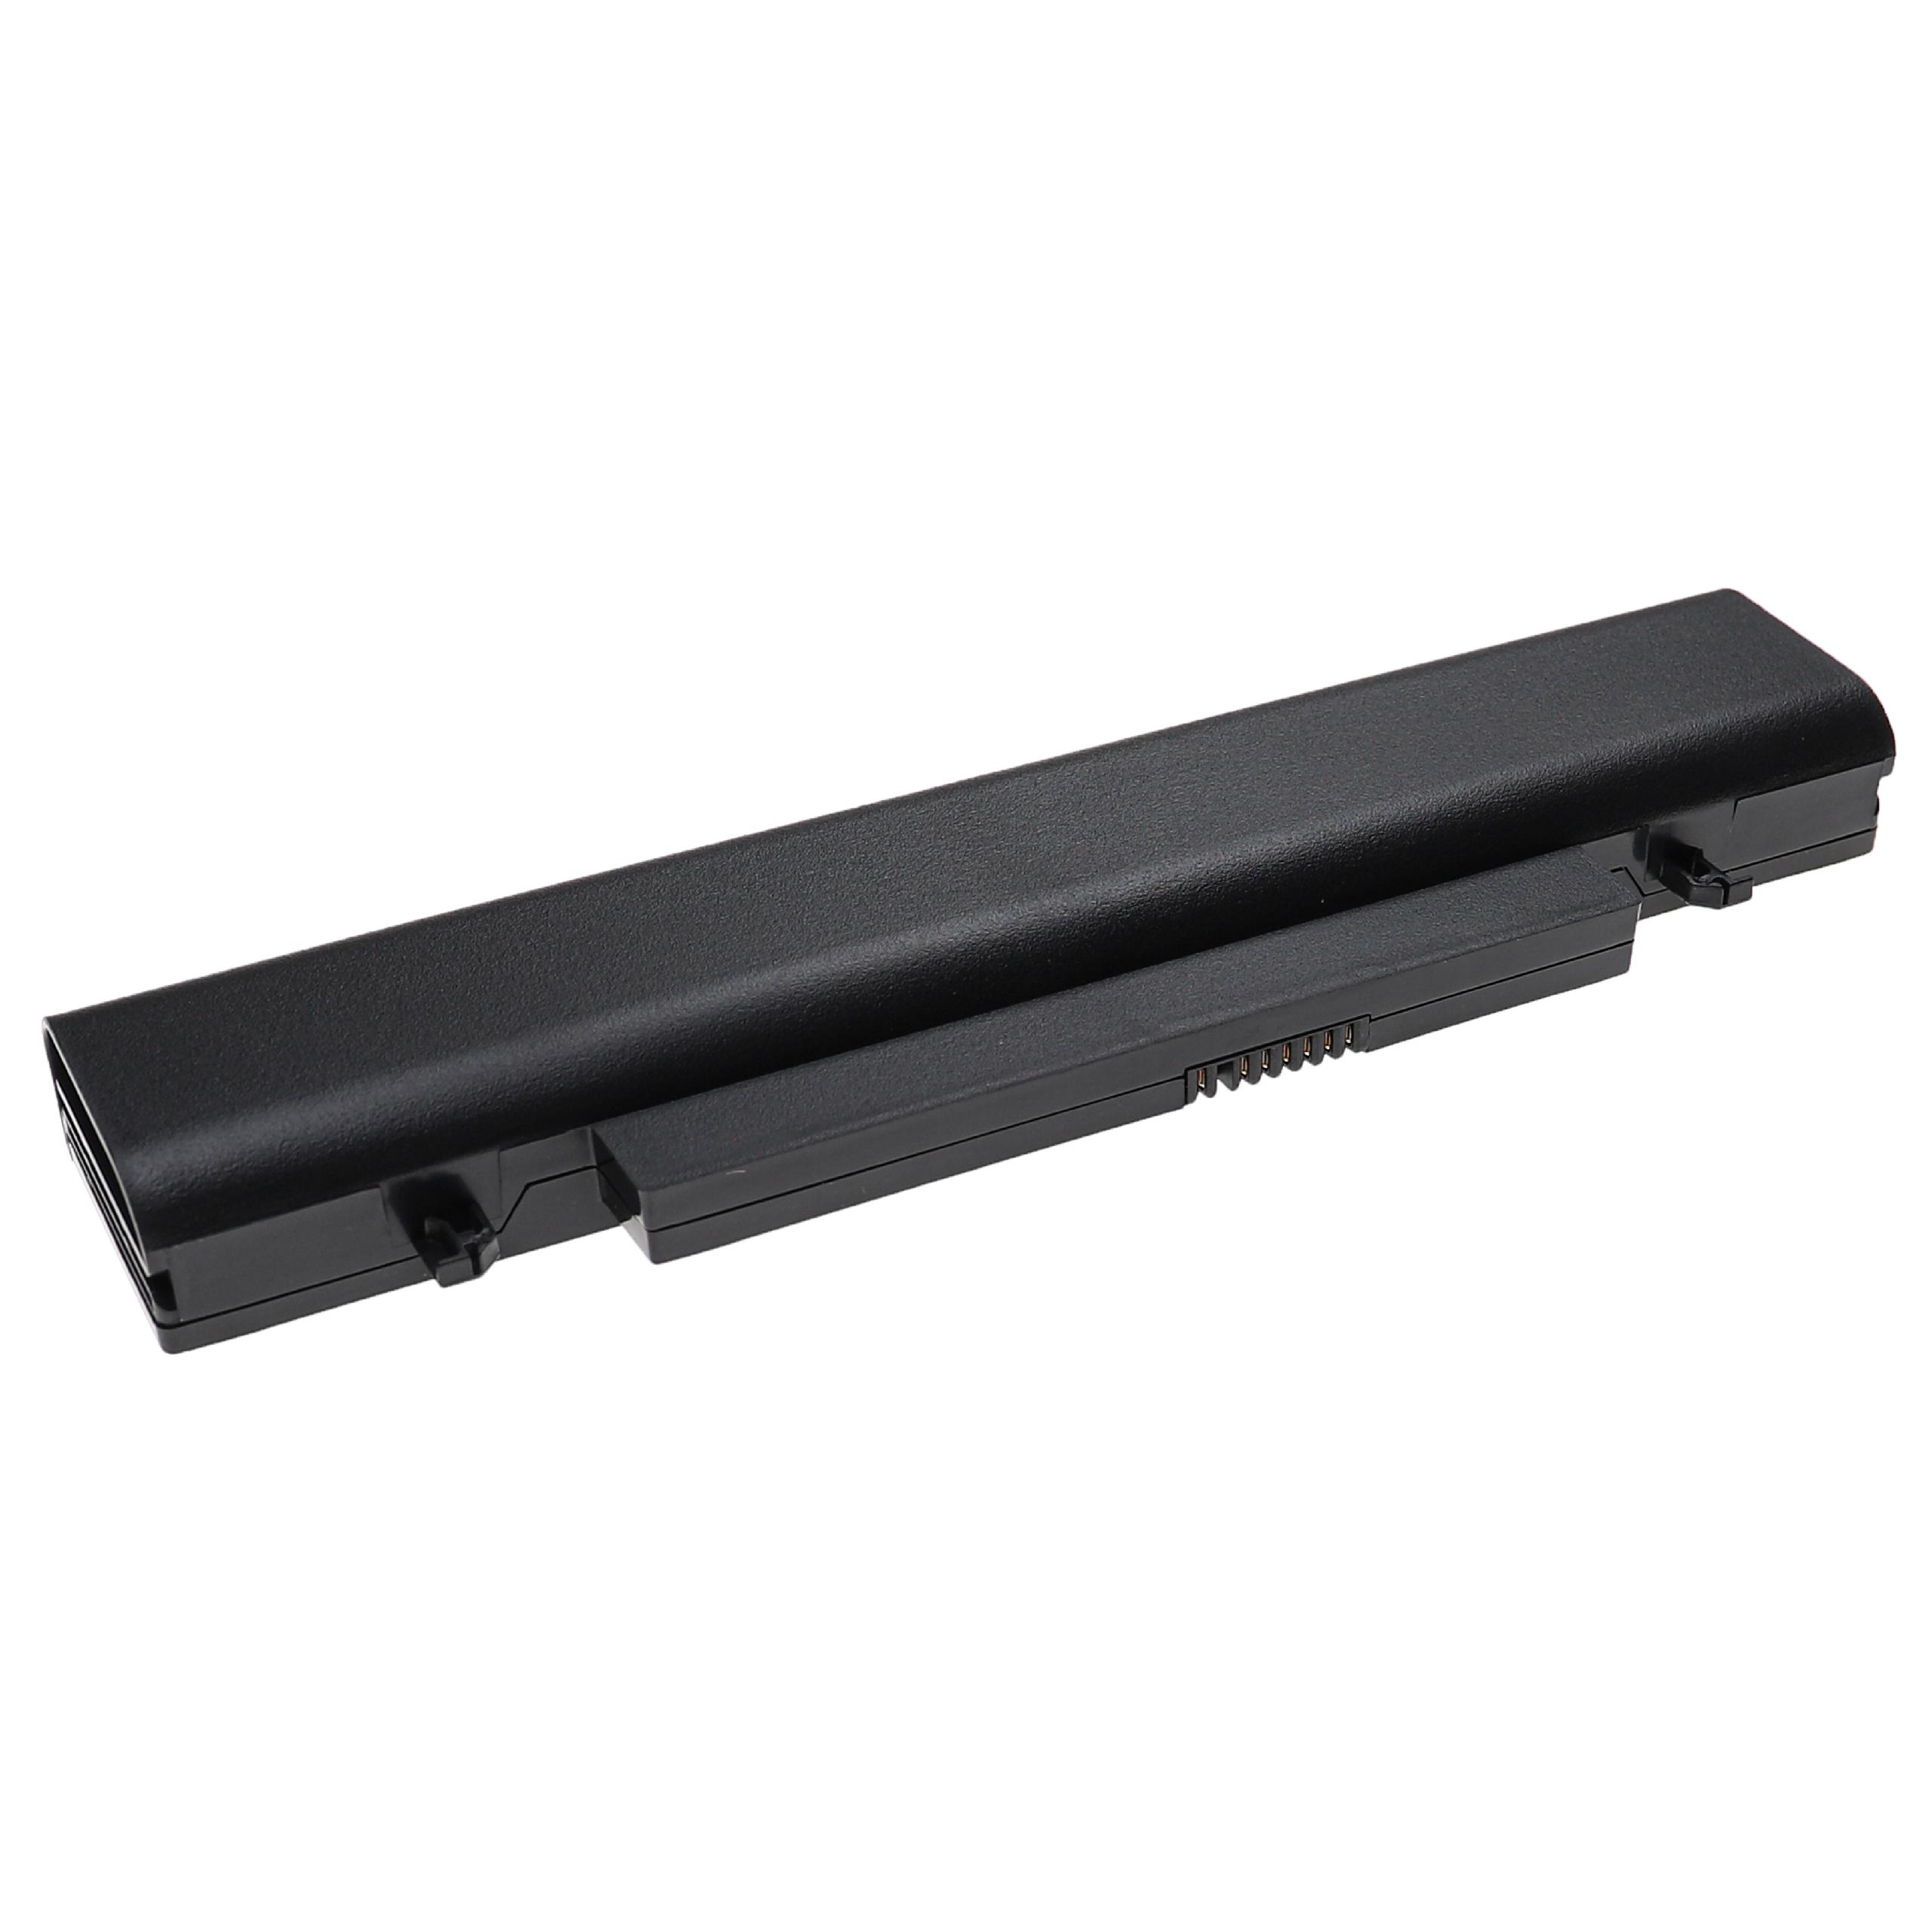 Notebook Battery Replacement for Samsung AA-PB1VC6B, AA-PL1VC6B, AA-PB1VC6W, AA-PL1VC6W - 6000mAh 11.1V Li-Ion